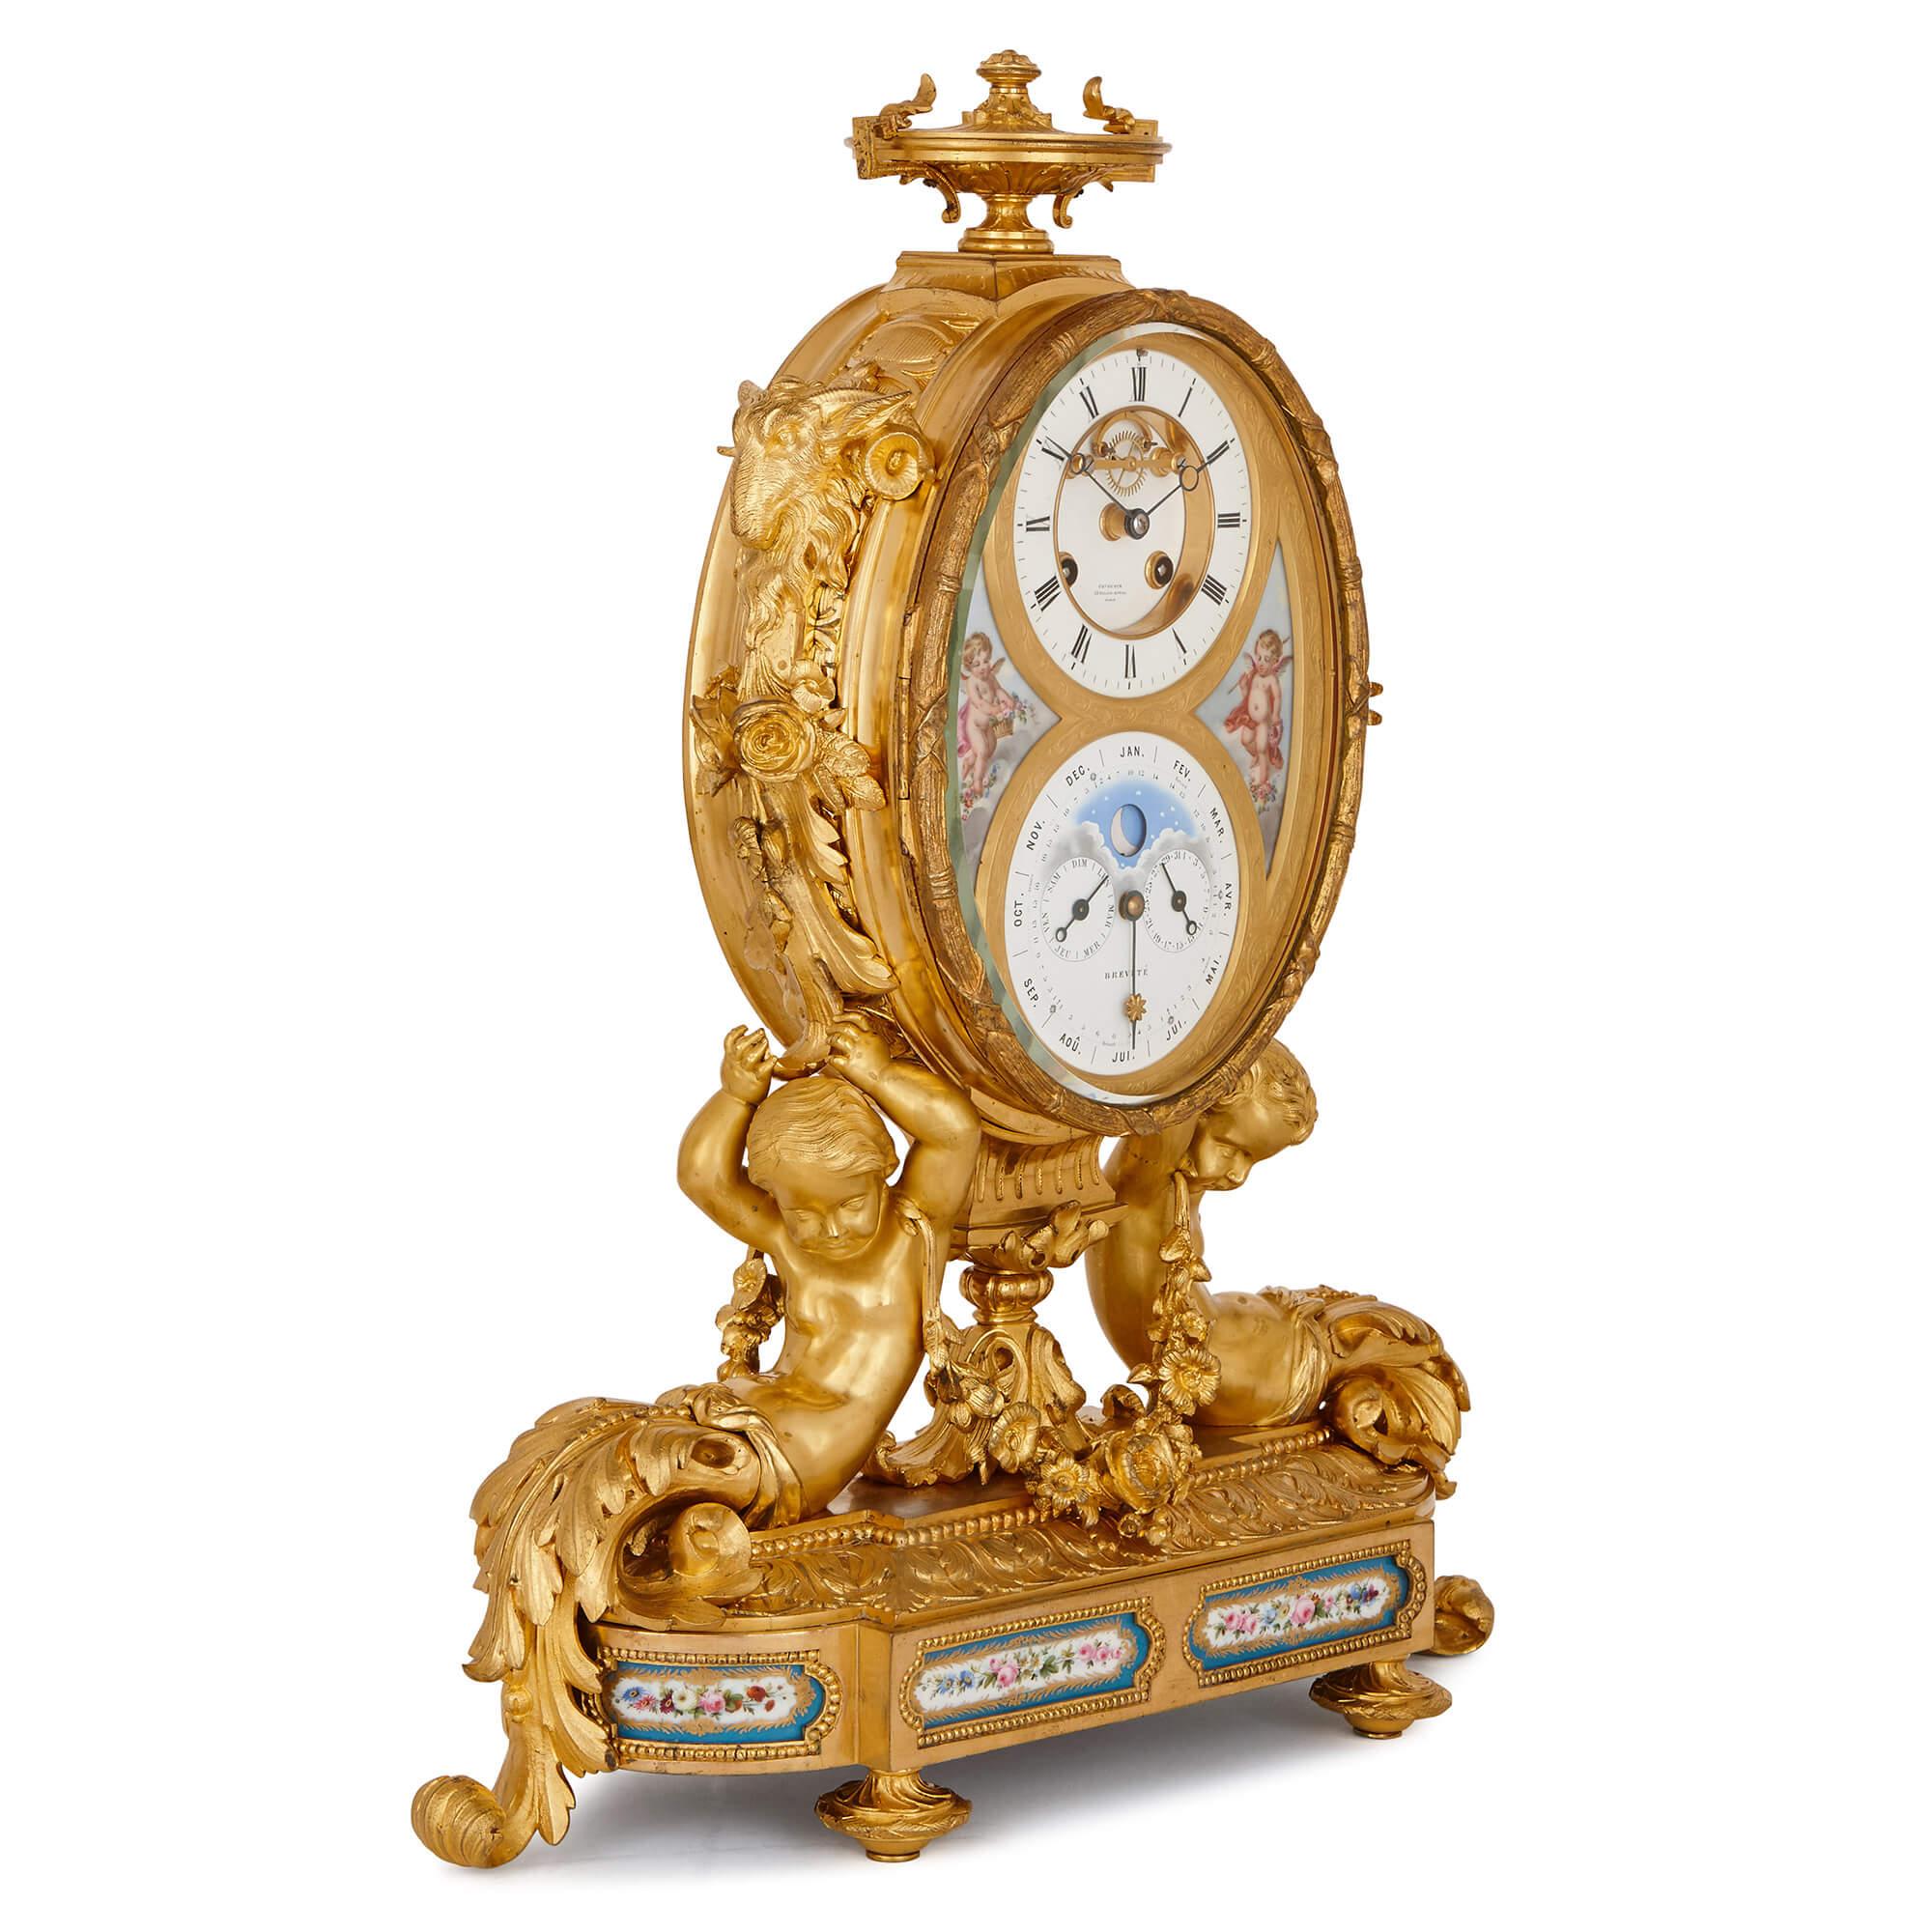 This sumptuous clock set is the work of the renowned Charles Oudin firm in Paris, and showcases exquisite bronze work, elegant design and a masterful clock mechanism. Charles Oudin, founder of the firm in the late 18th century, rose to prominence